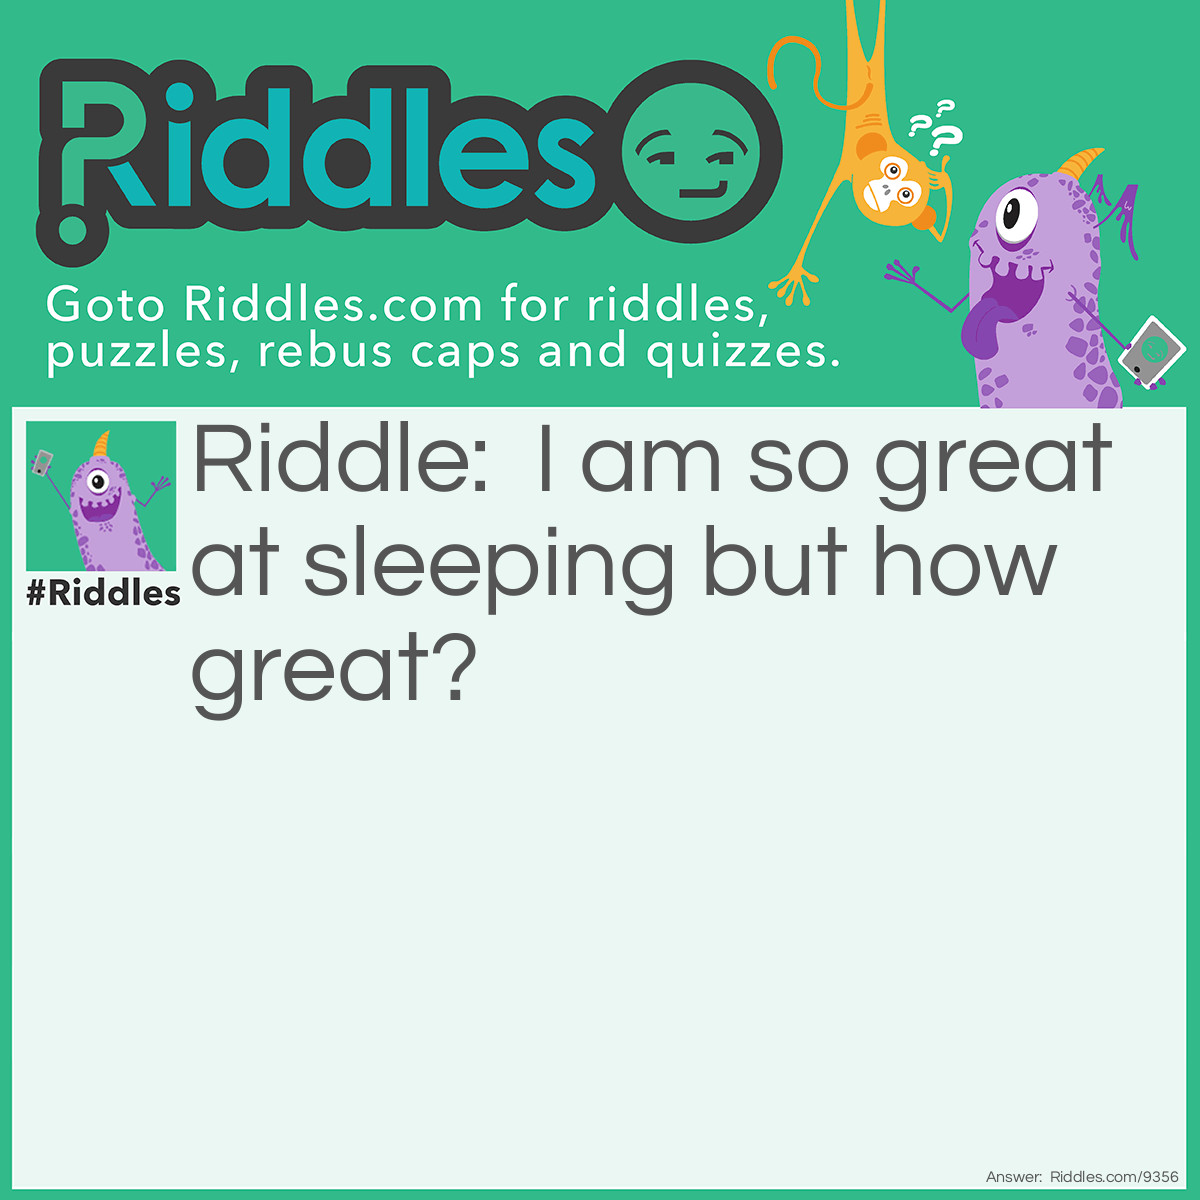 Riddle: I am so great at sleeping but how great? Answer: I can do it with my eyes closed, and I can do it in my sleep!